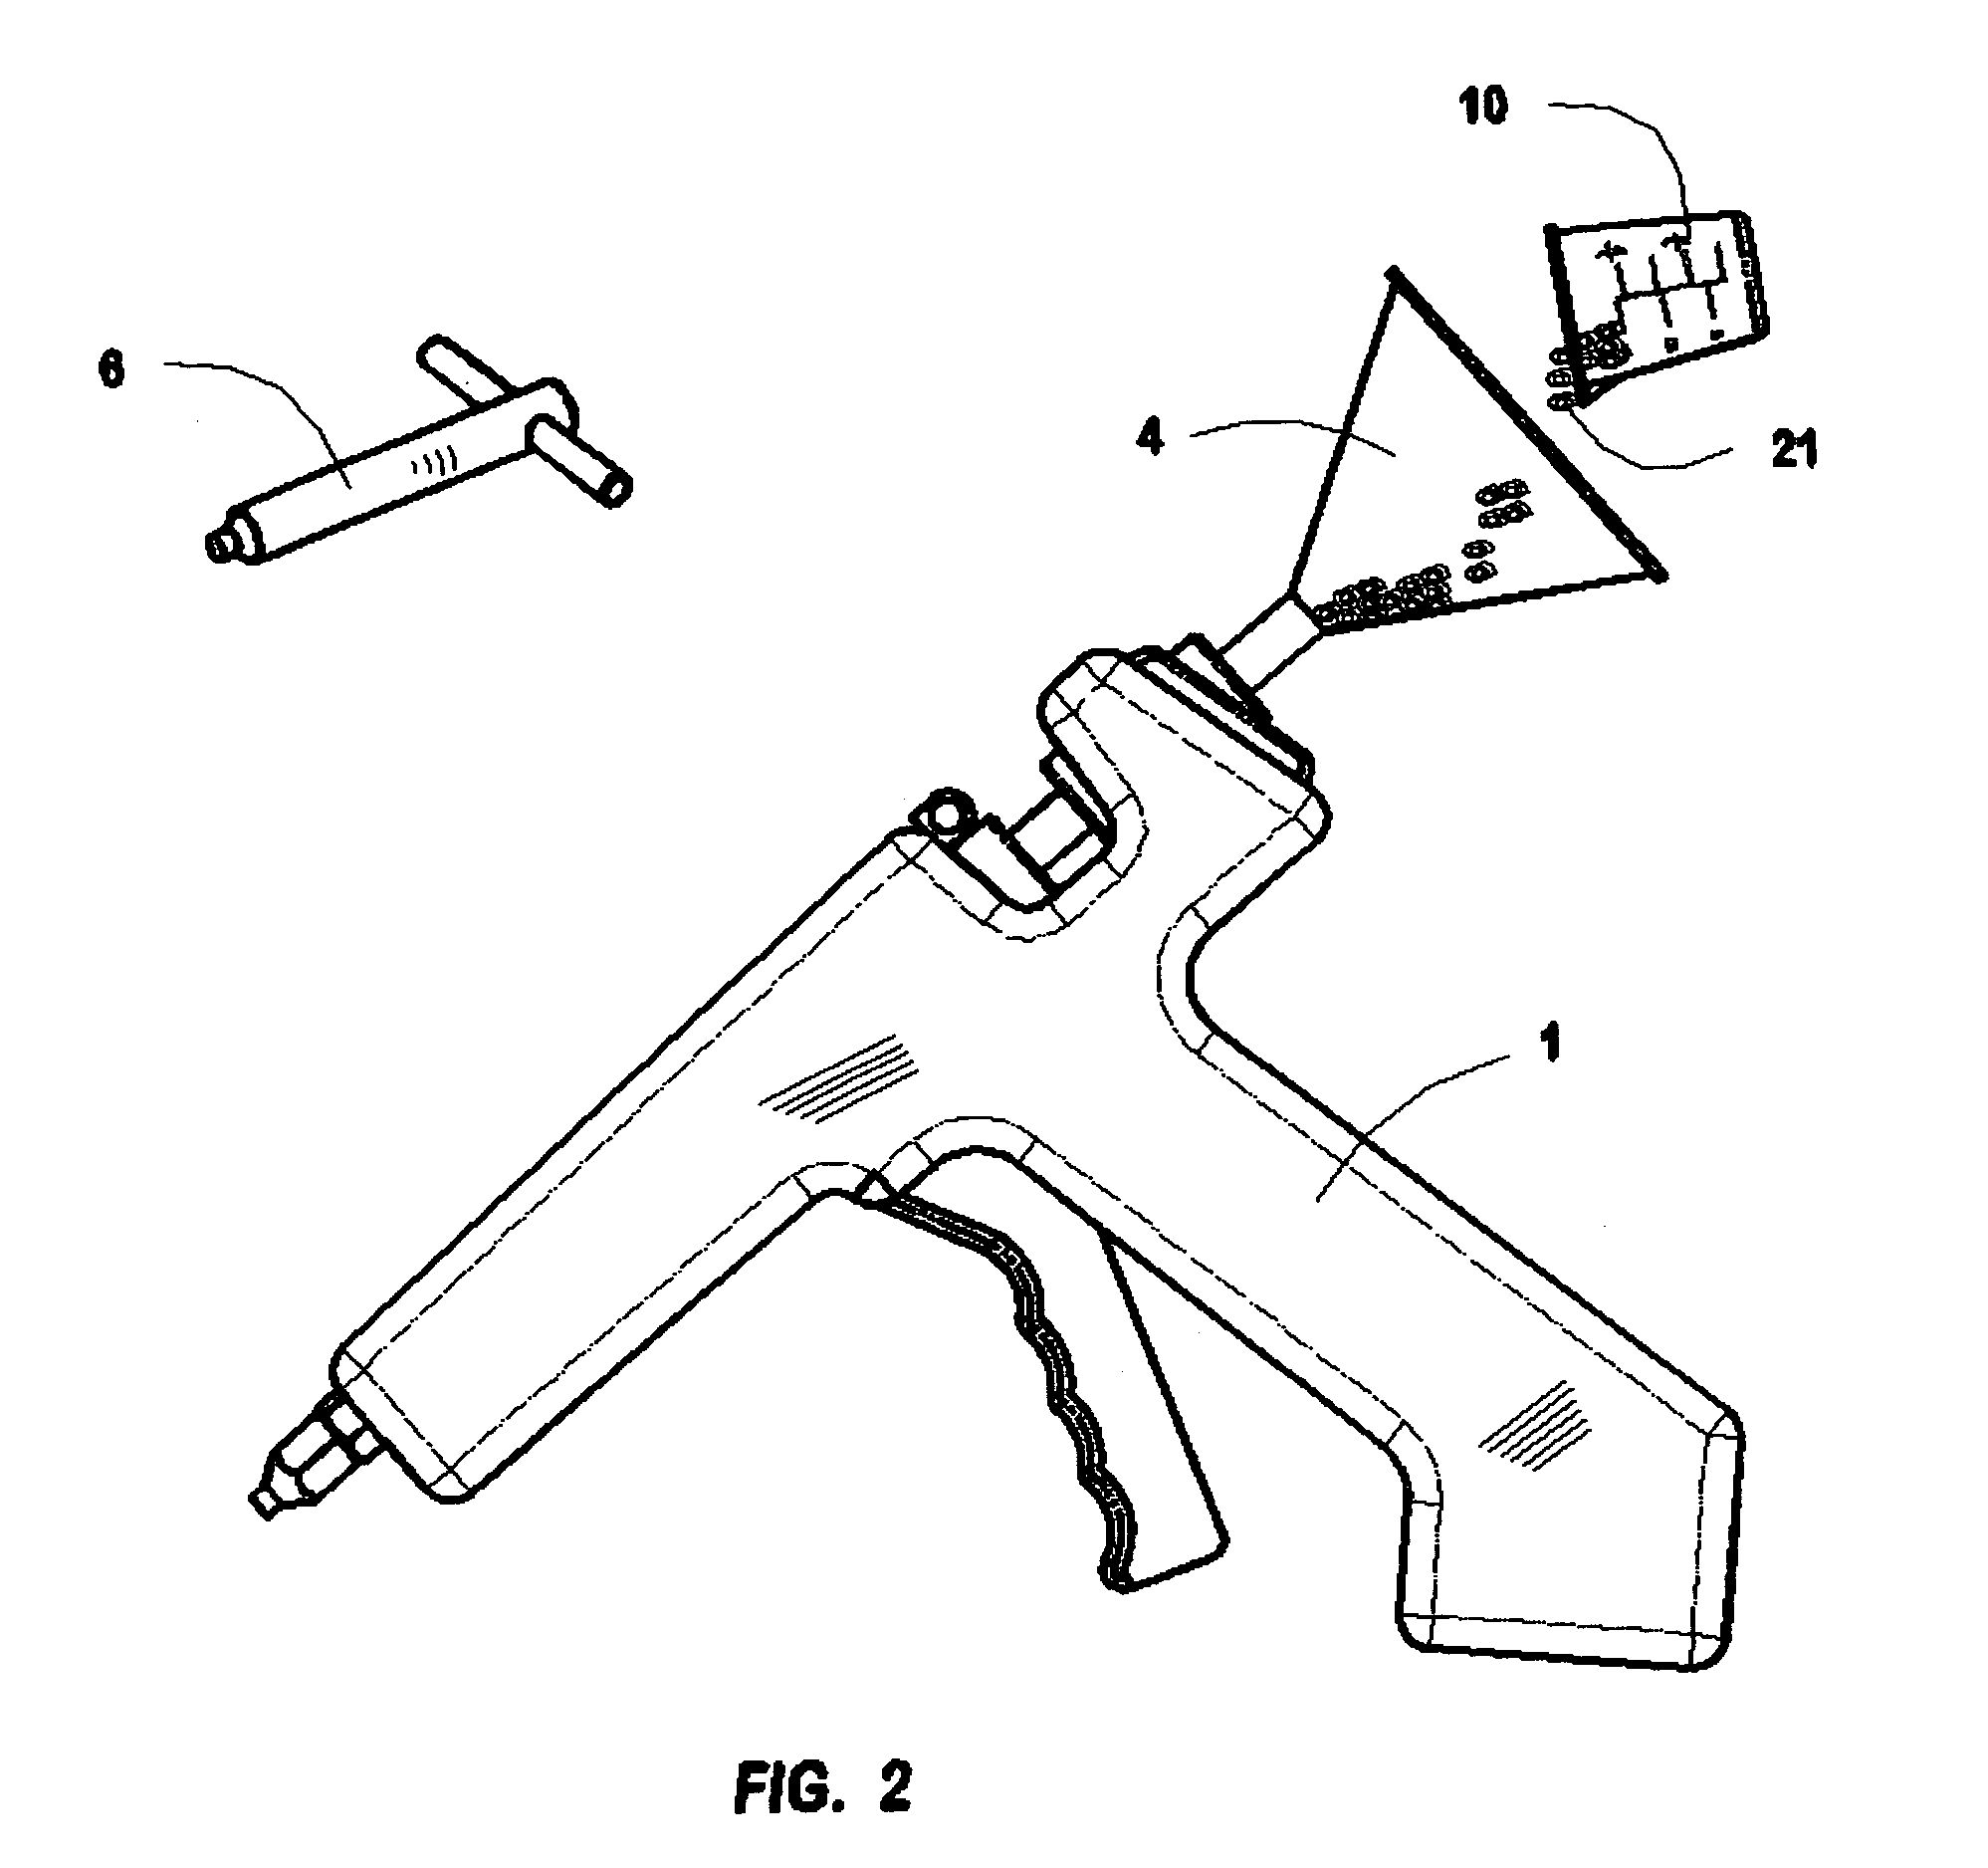 Apparatus, method, and kit for fabricating dental clasps